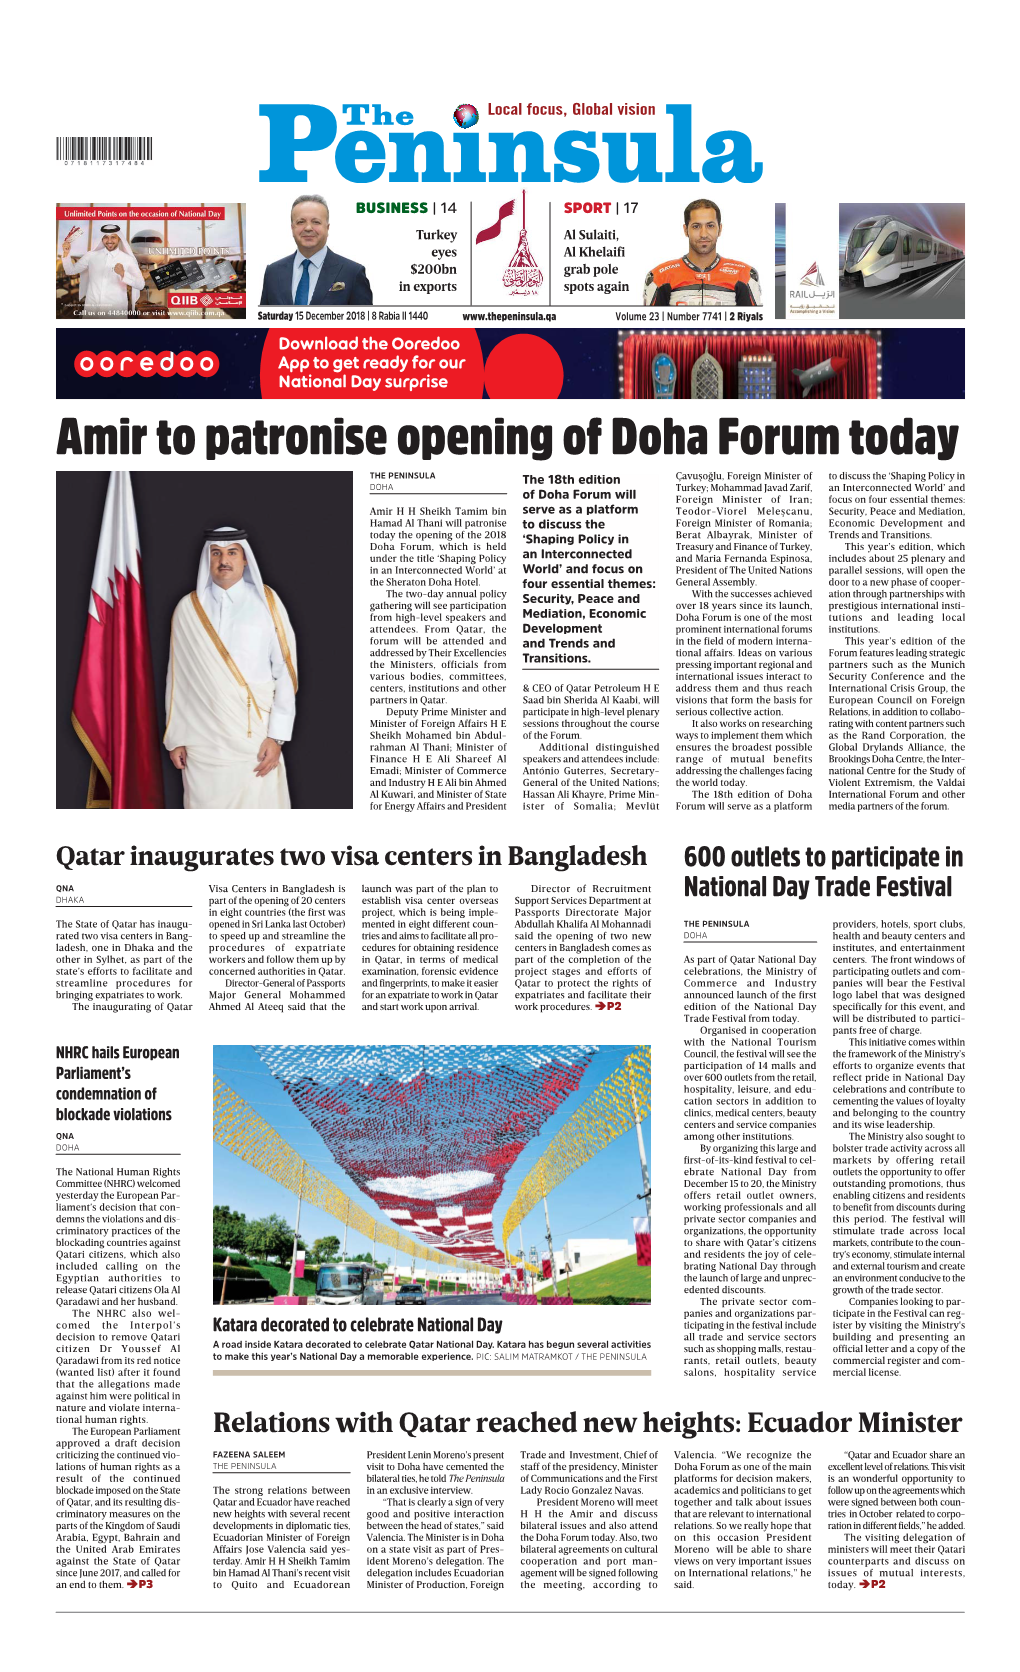 Amir to Patronise Opening of Doha Forum Today